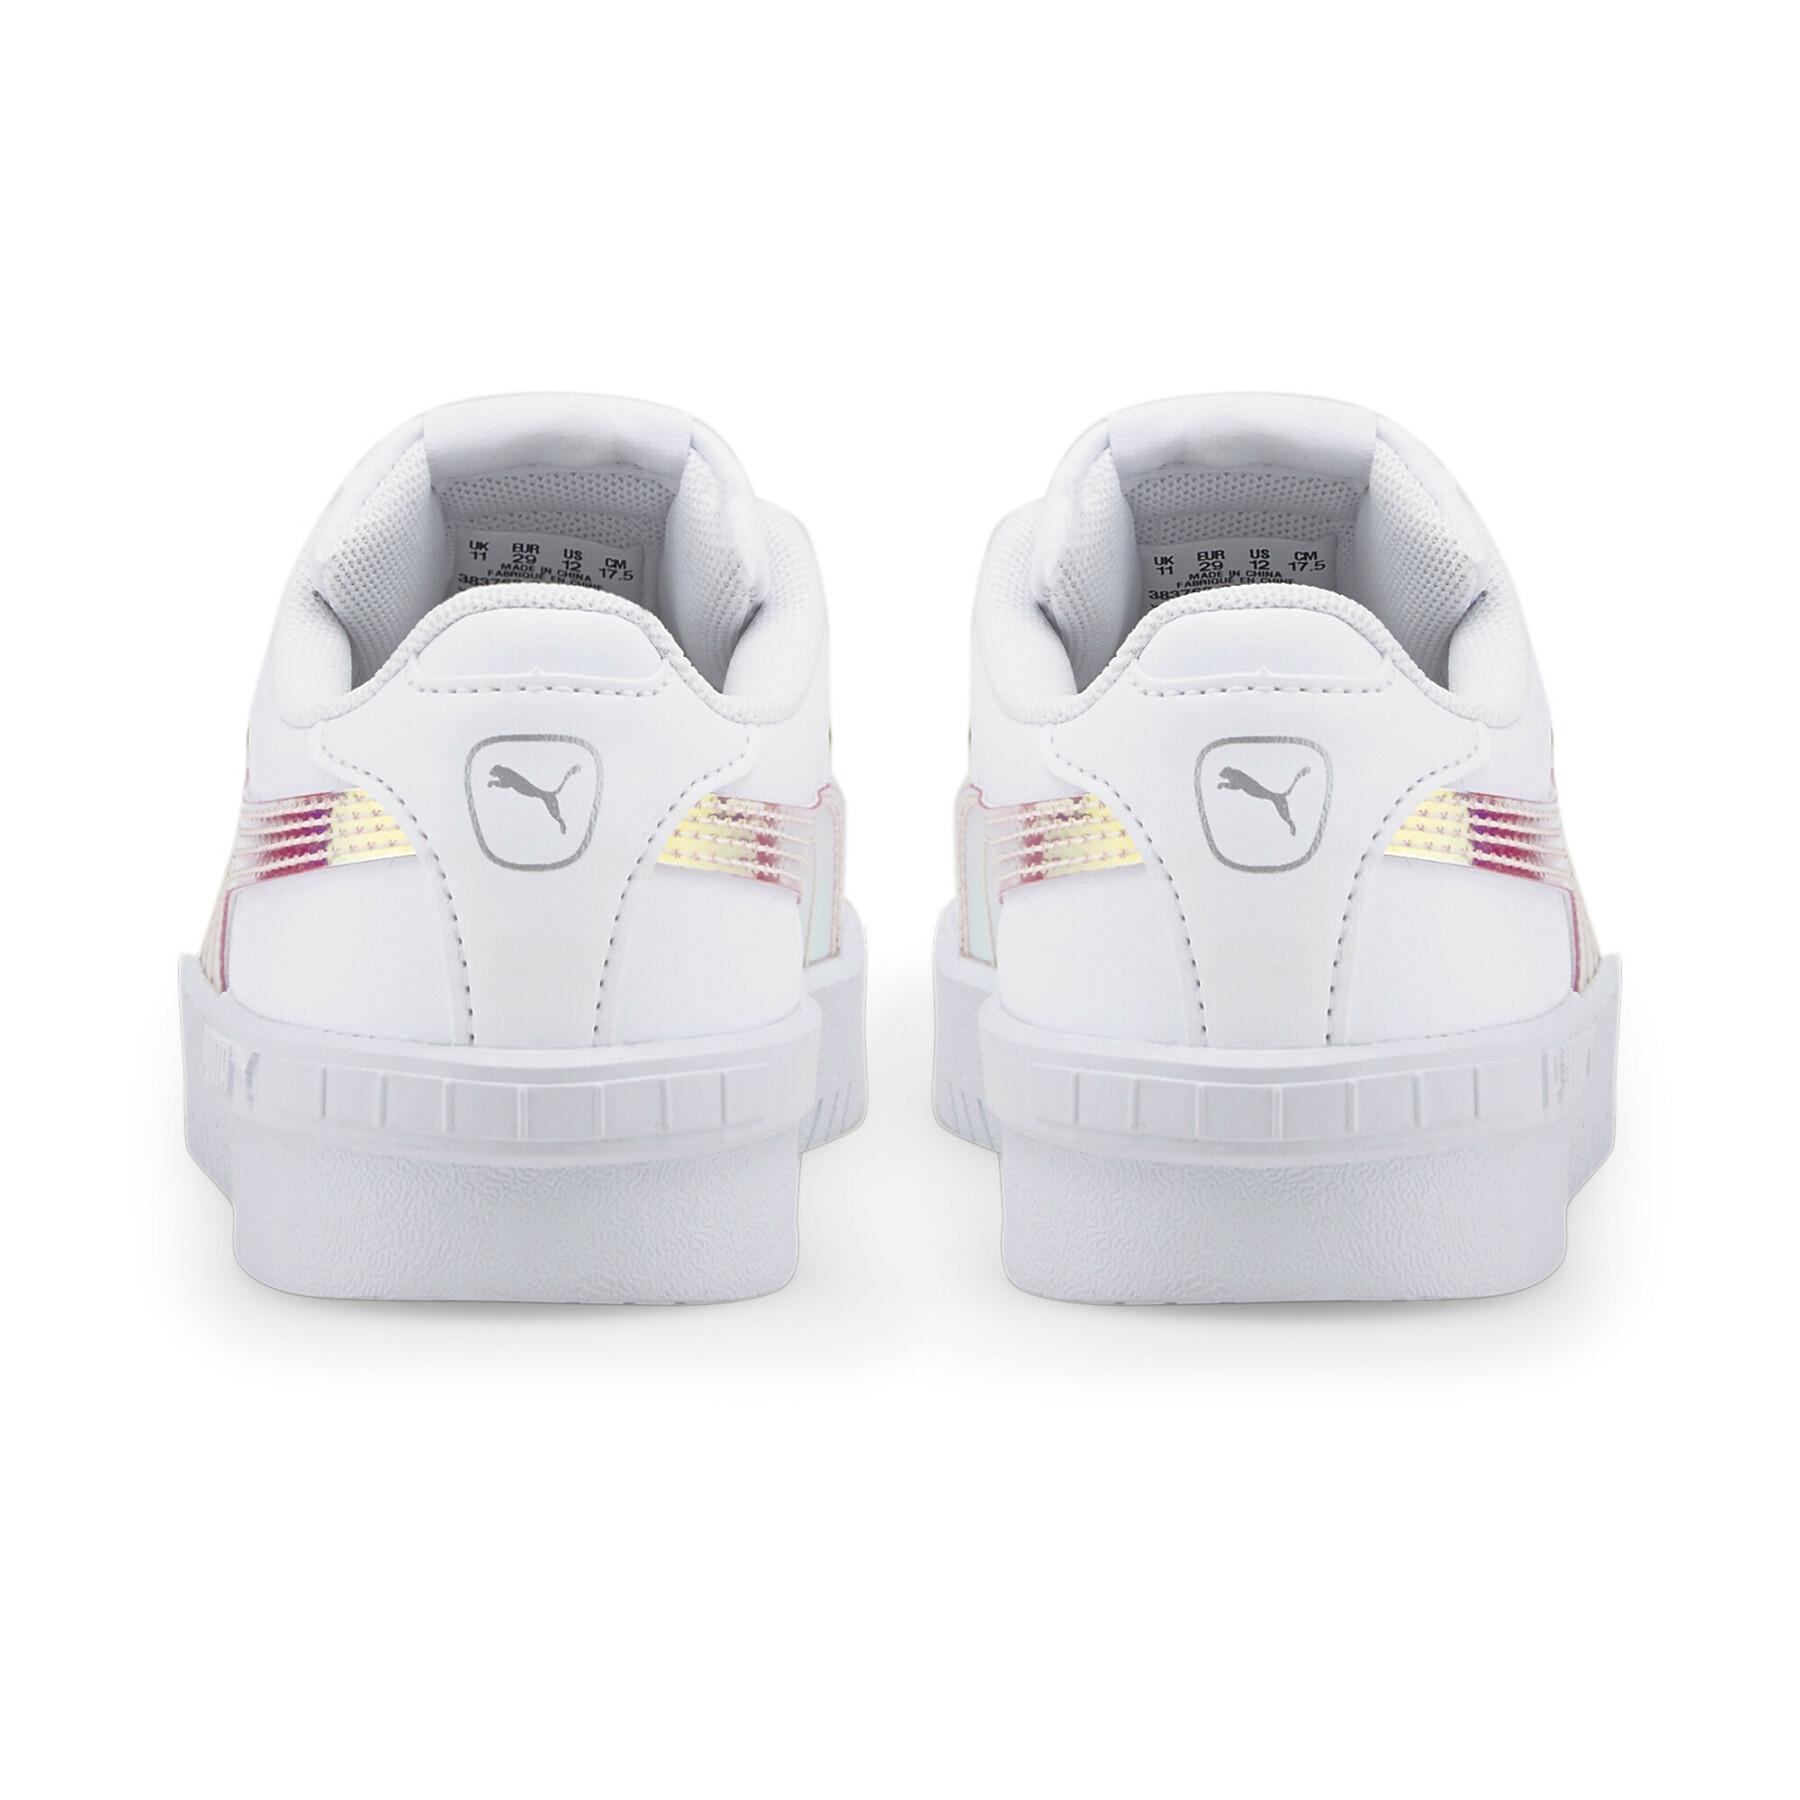 Chaussures fille Puma Jada Holo PS